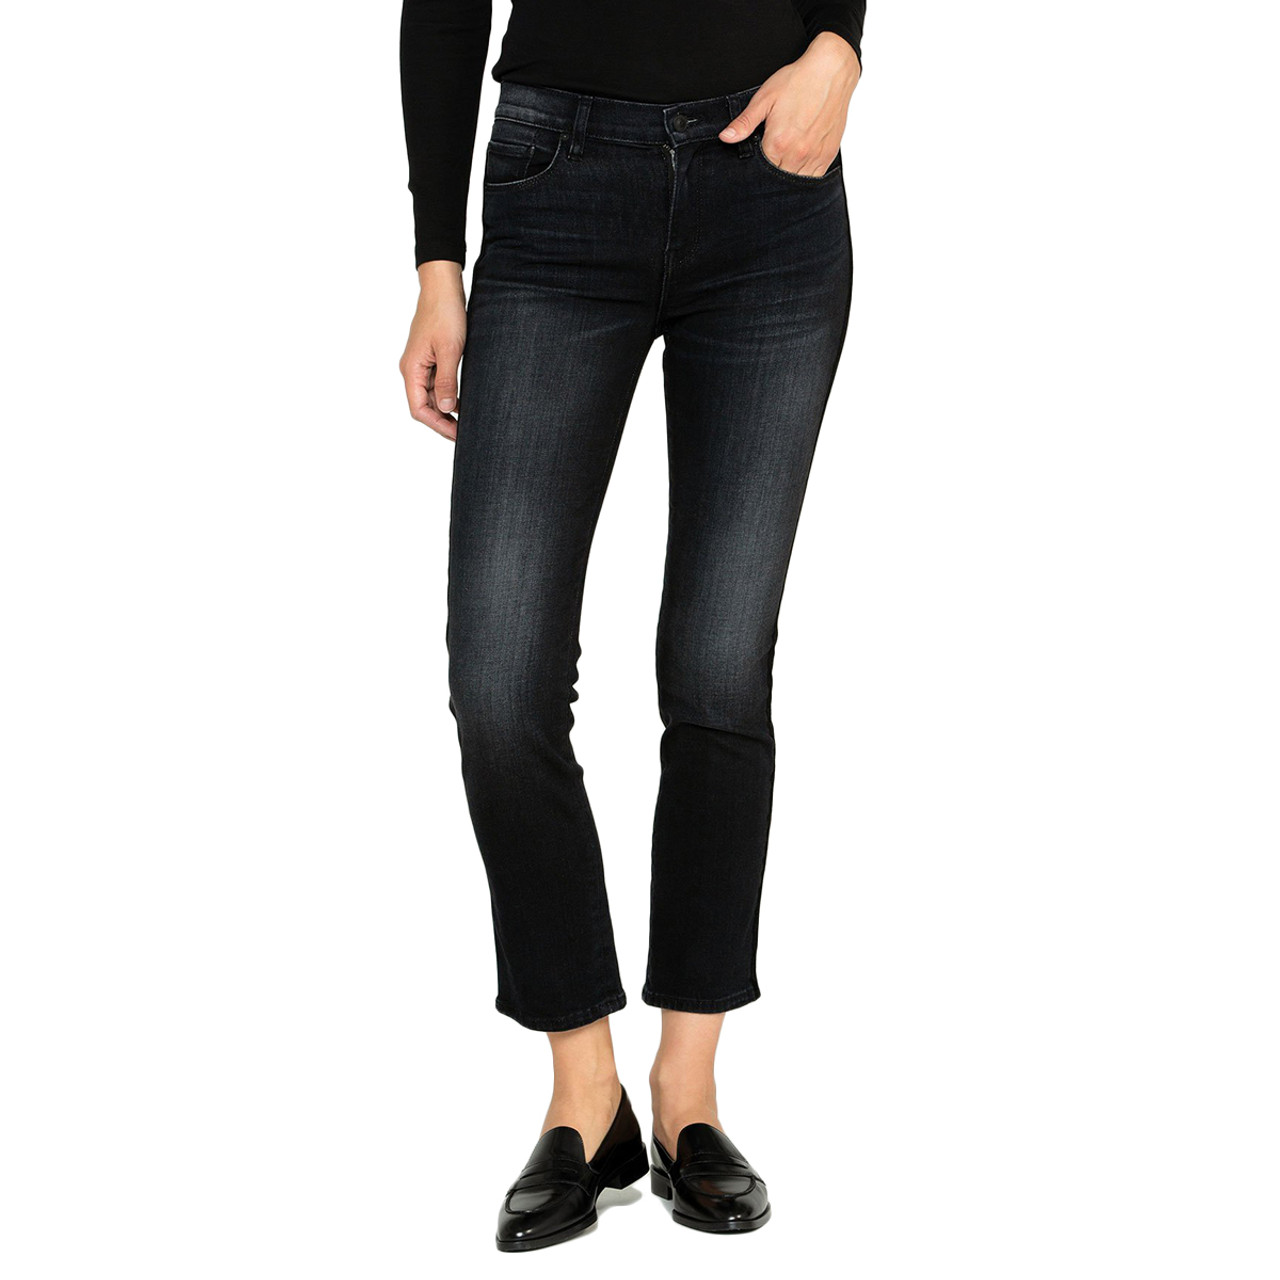 Hudson Nico Mid Rise Straight Crop Jean in Black Wash Prolong.